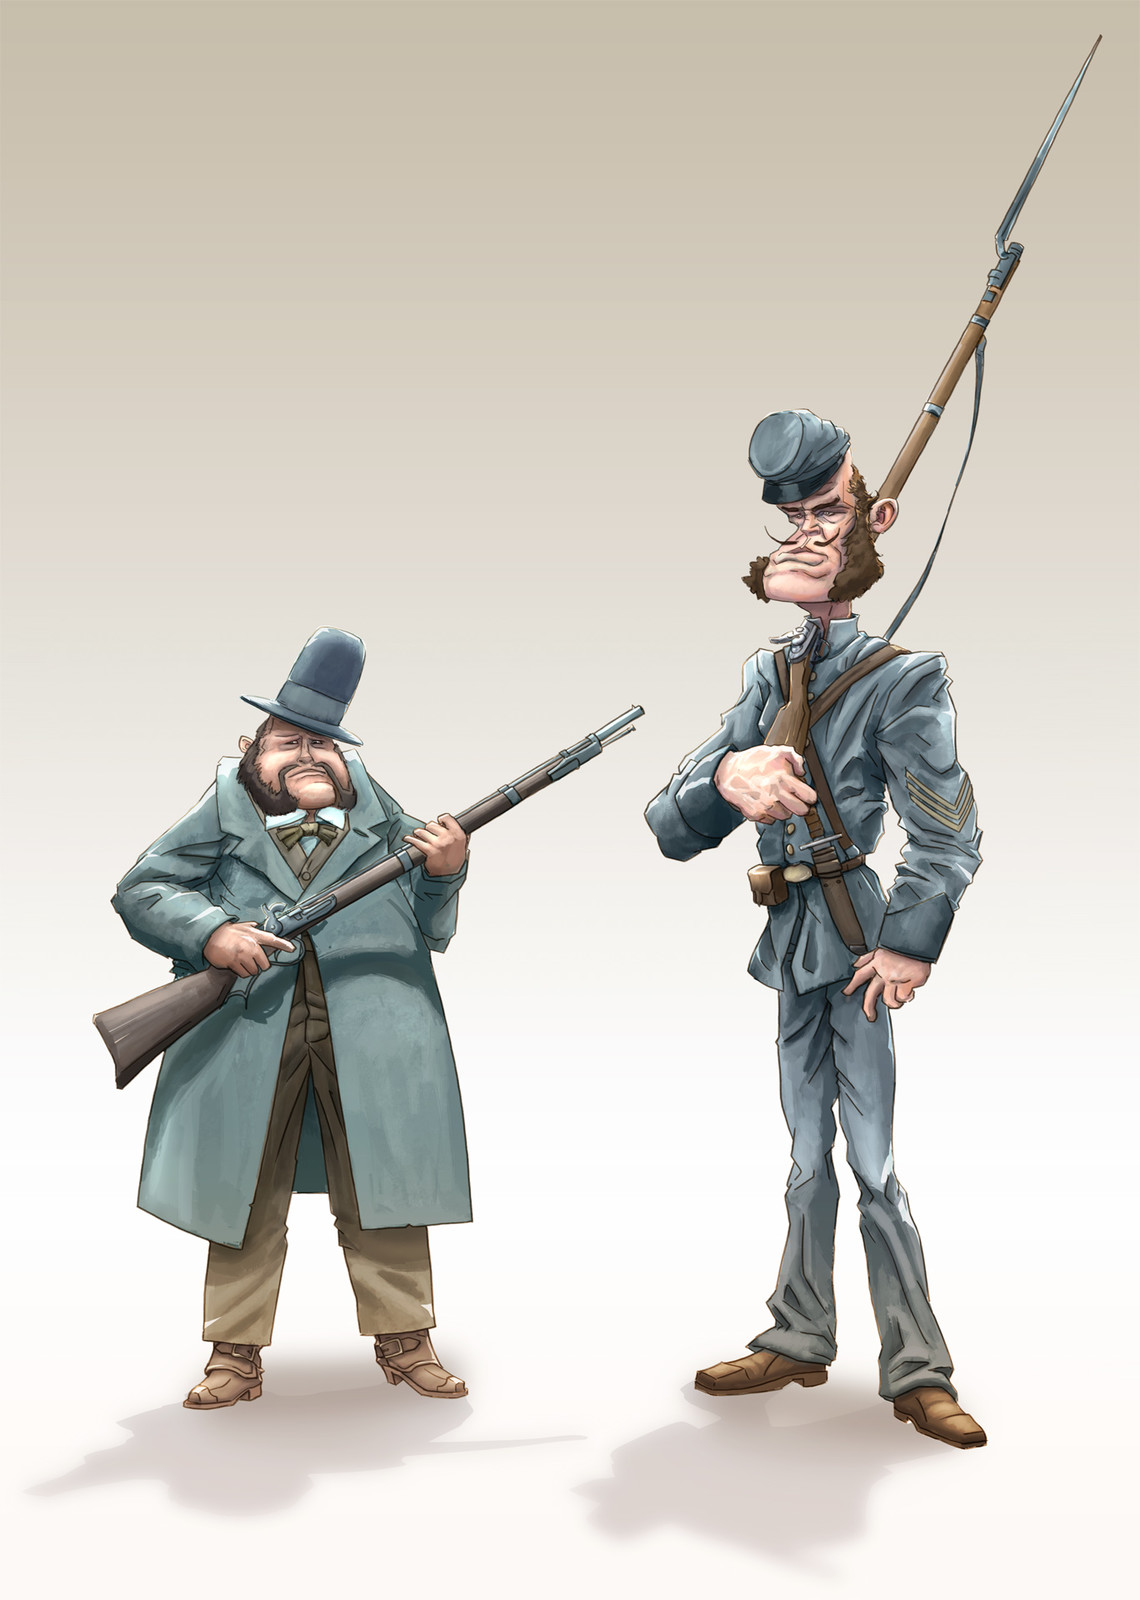 The Lawmen: Major Dingston and his adjutant Ex- Sgt. Taylor